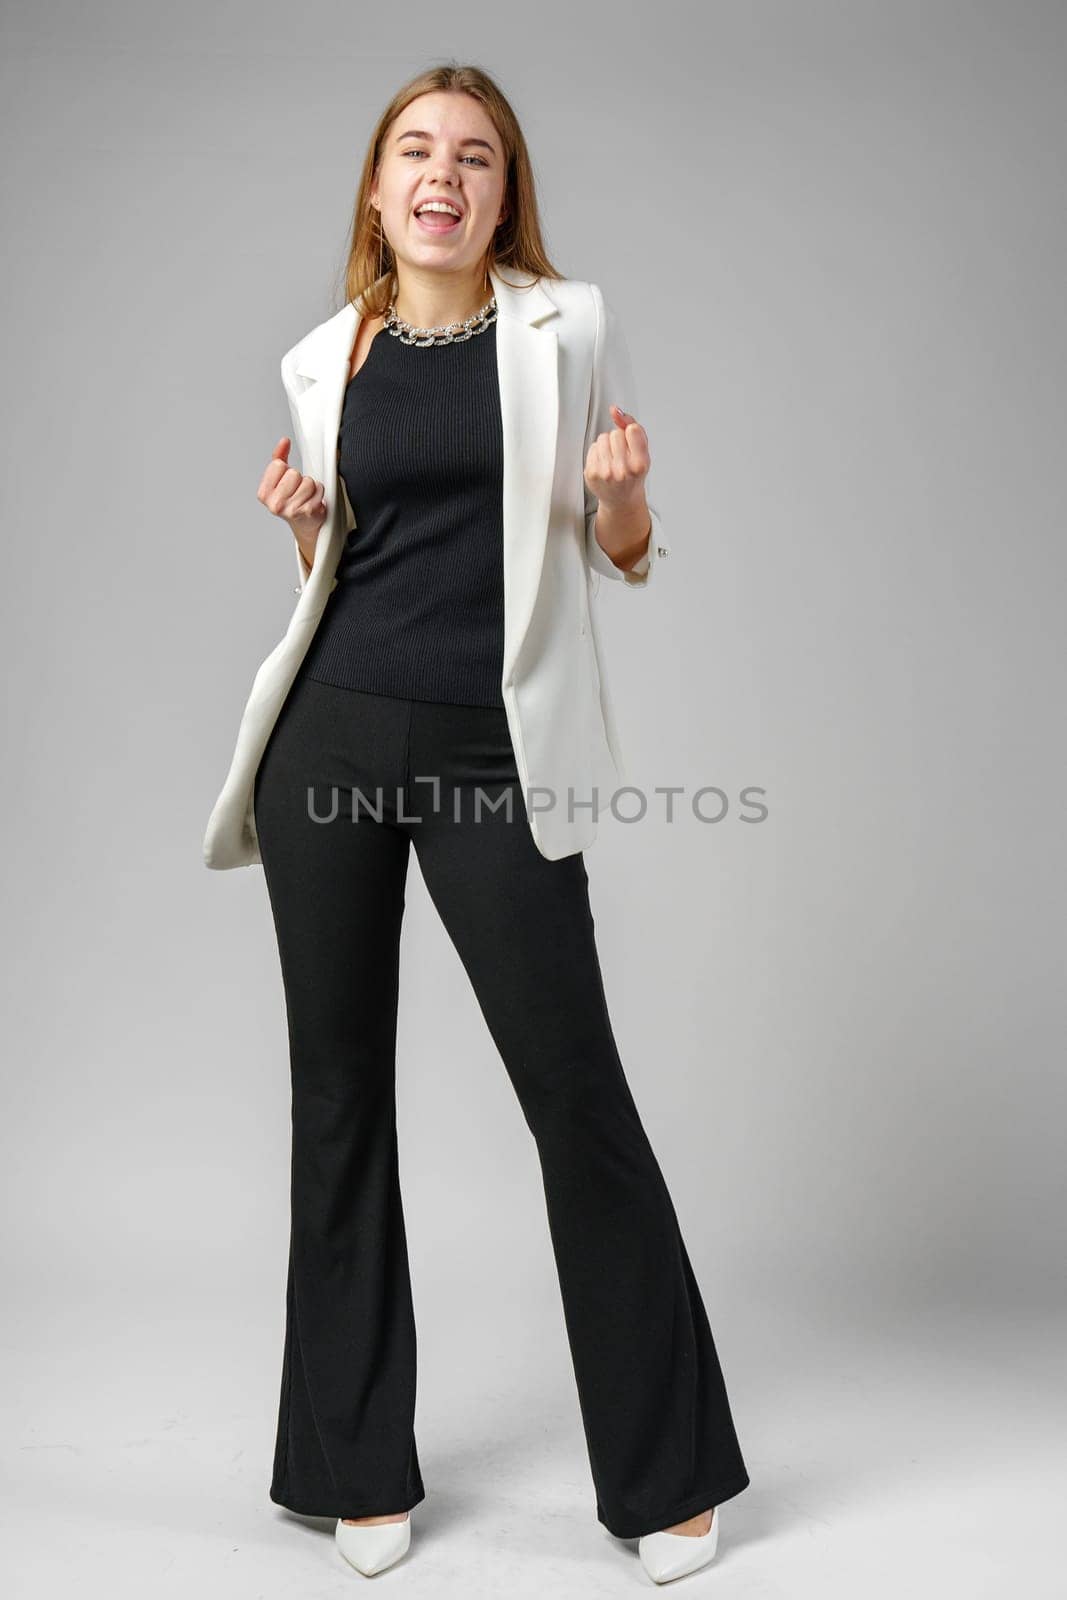 Confident Young Businesswoman Flexing Muscles in Smart Casual Attire Against Grey Background close up